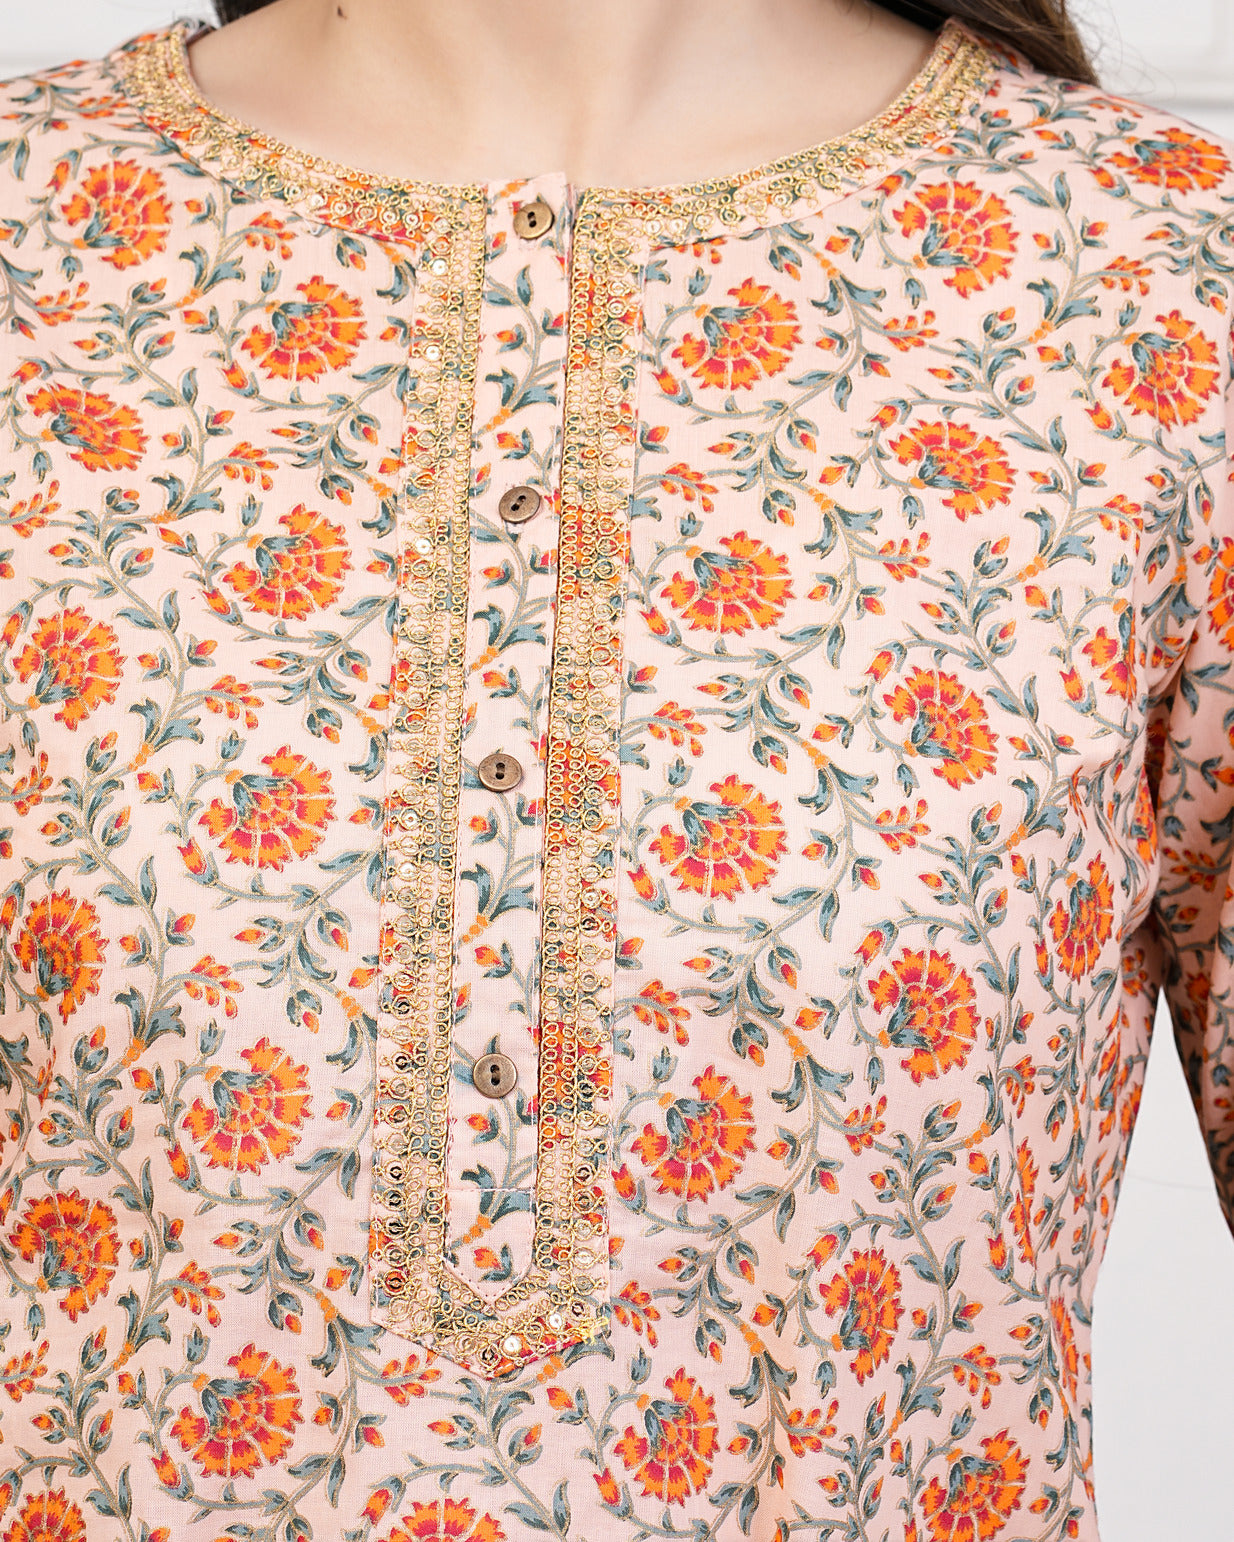 Peach Floral Print with Gold Embroidery Cotton Kurti